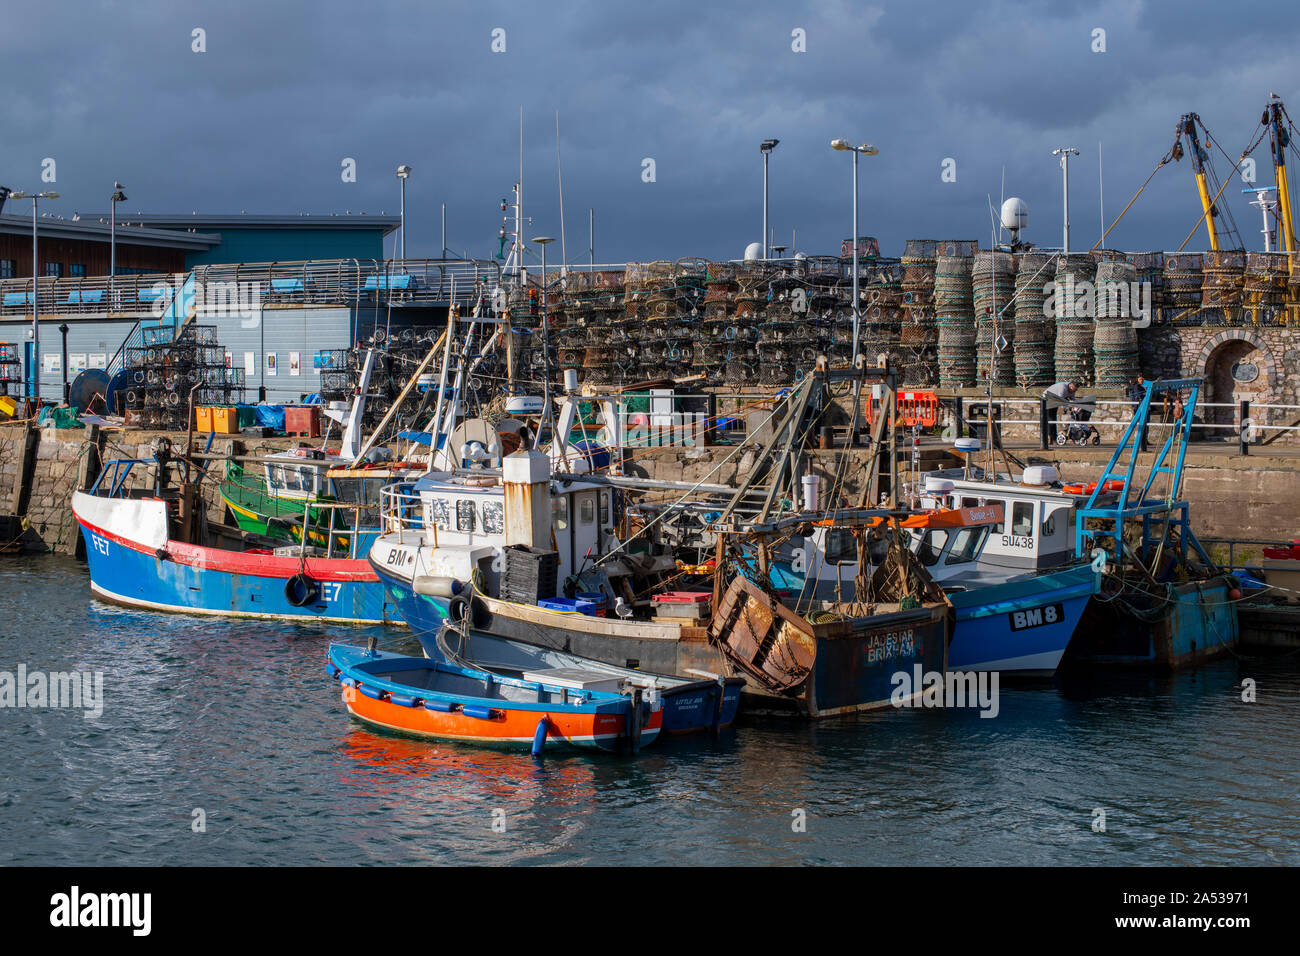 Shafts of light during the approaching storm light up the gaggle of boats in Brixham Inner Harbour in the month of October Stock Photo